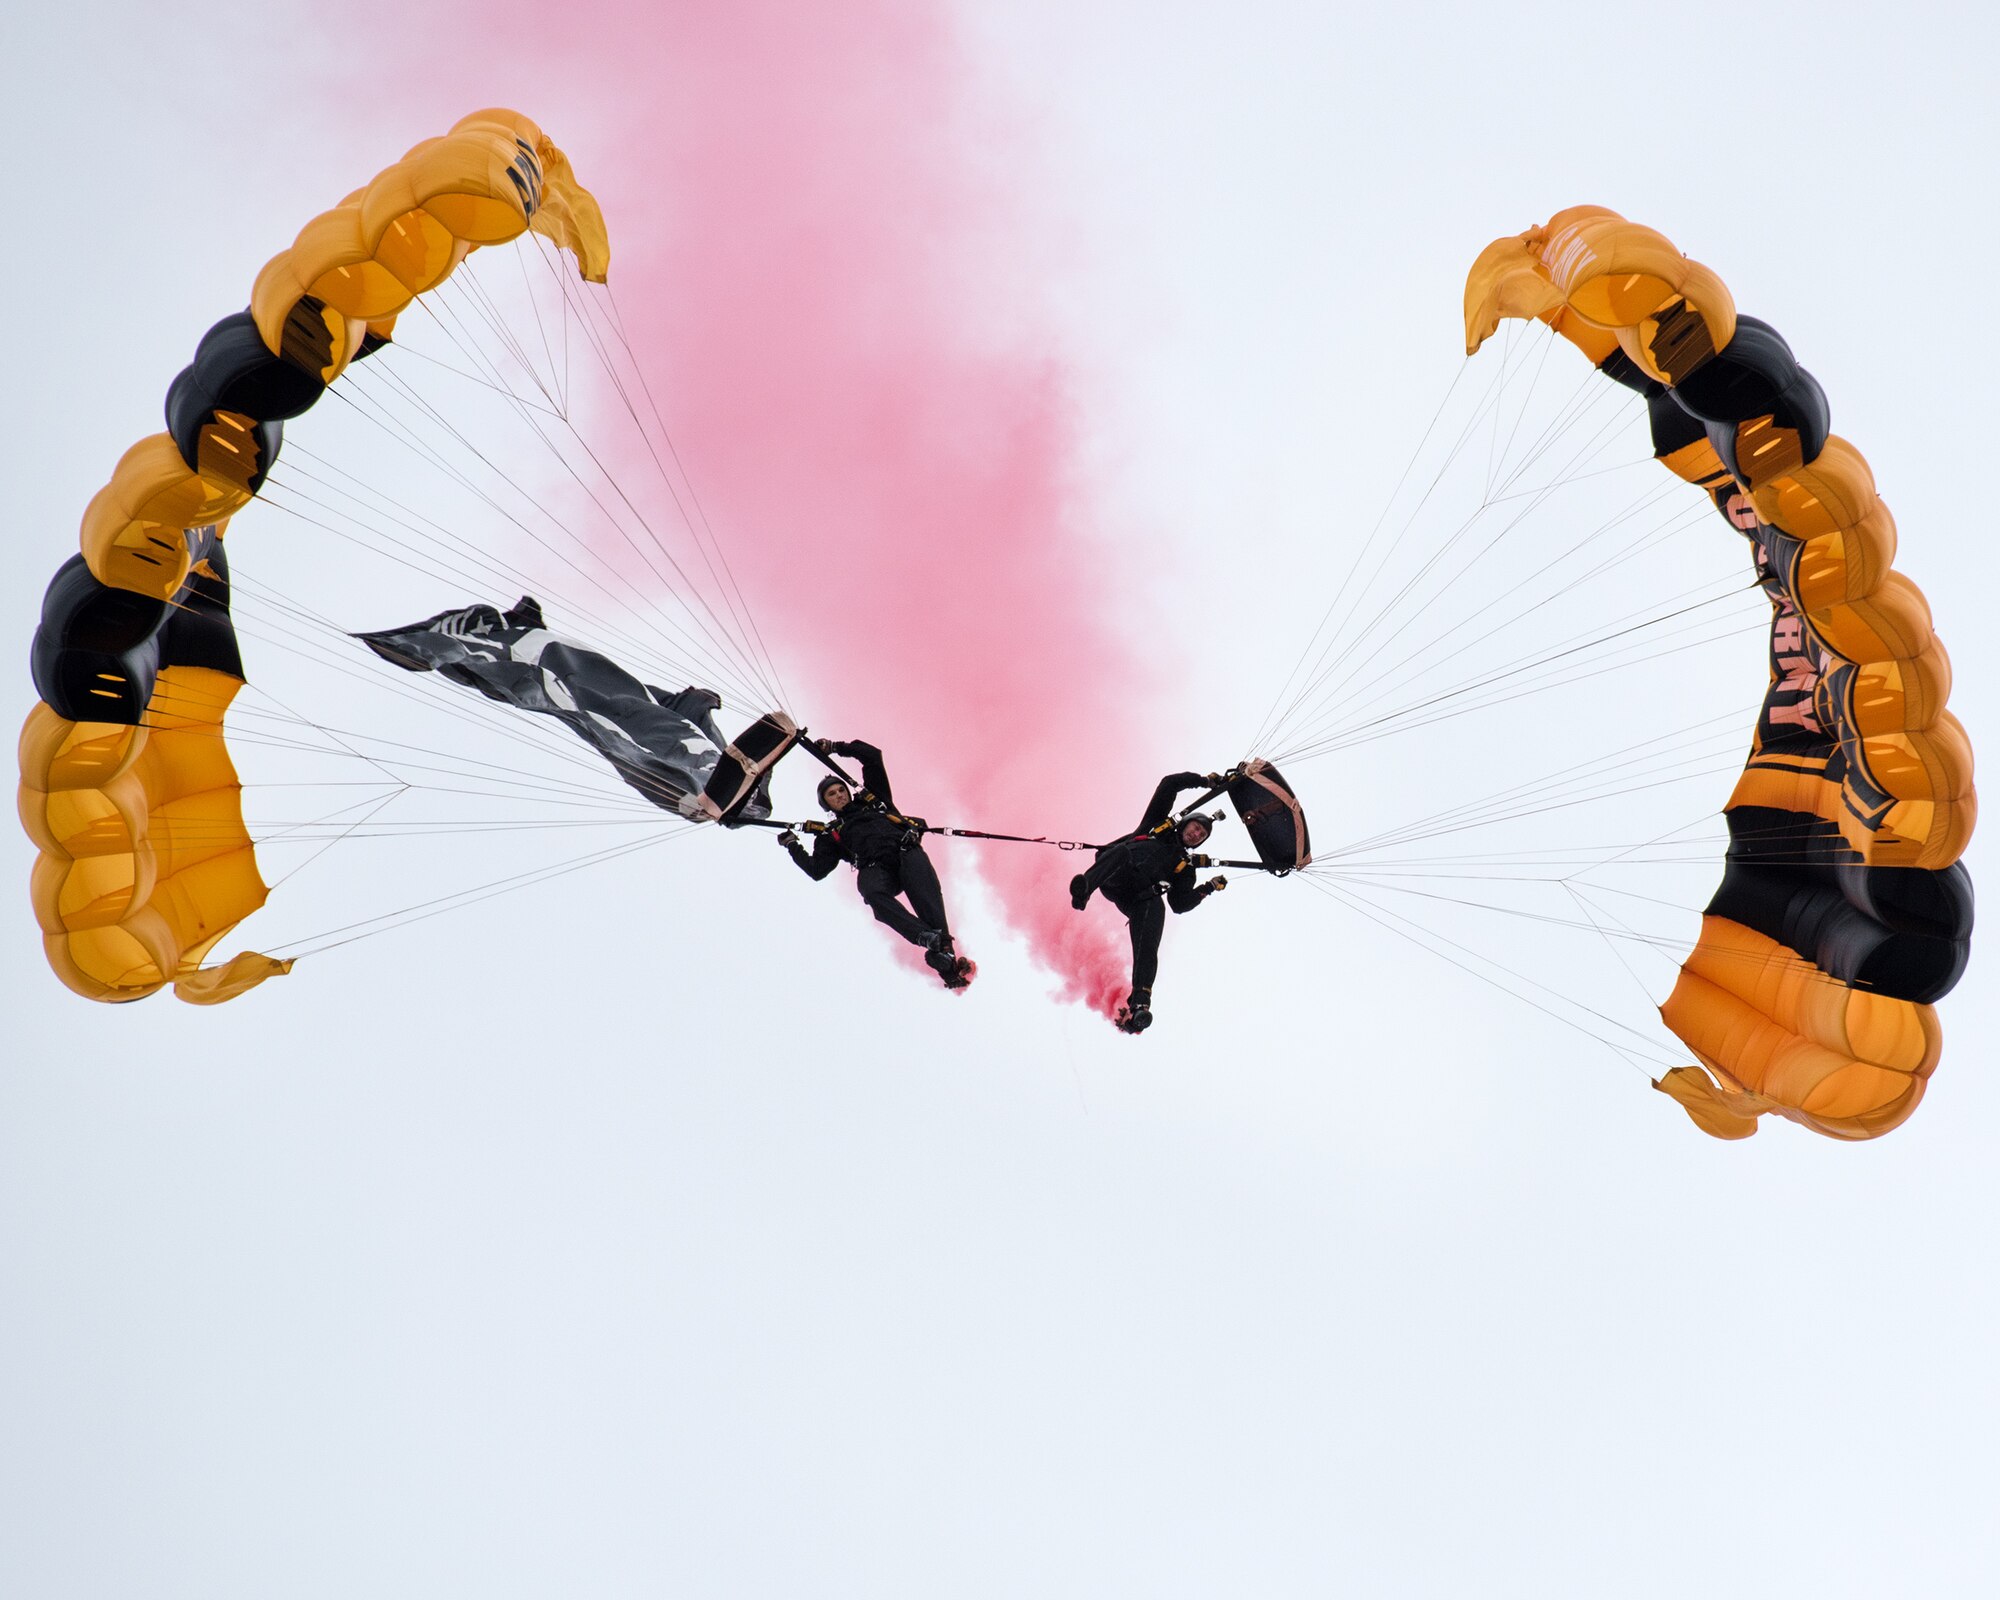 Members of the U.S. Army Golden Knights parachute team perform skydiving maneuvers during the Wings Over Solano Air Show at Travis Air Force Base, Calif., May 6, 2017. The two-day event featured performances by the U.S. Air Force Thunderbirds aerial demonstration team, flyovers and static displays. (U.S. Air Force photo by Louis Briscese)